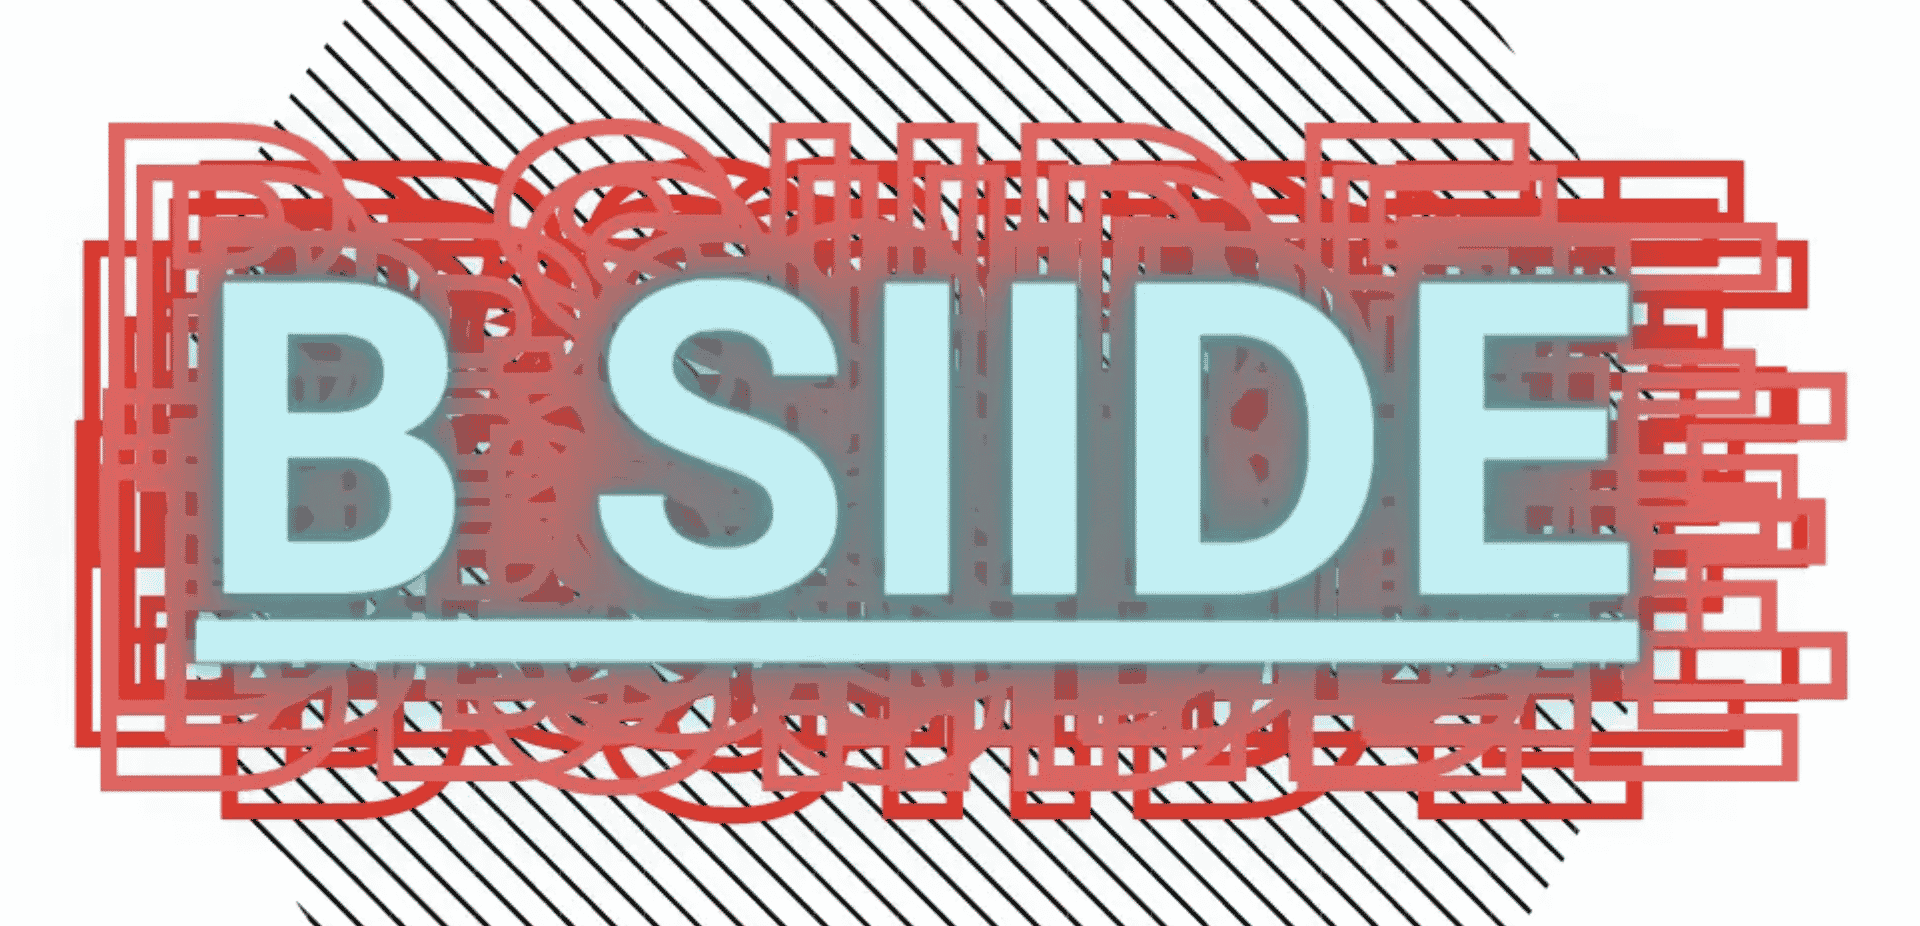 The B-Siide logo, which features the text "B-Siide" in neon blue on a red backround